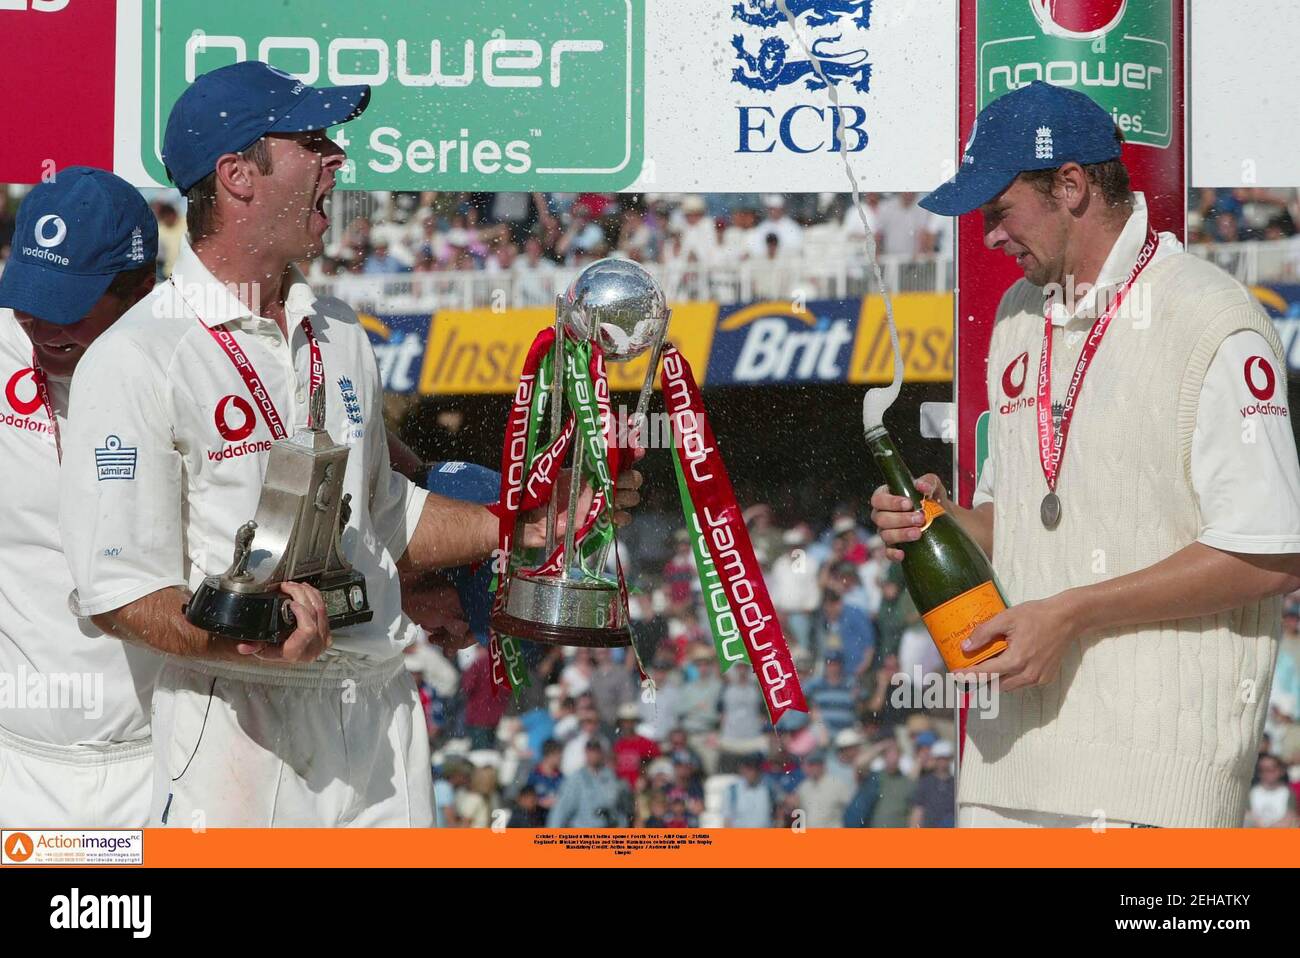 Cricket - England v West Indies npower Fourth Test - AMP Oval - 21/8/04  England's Michael Vaughan and Steve Harmison celebrate with the trophy  Mandatory Credit: Action Images / Andrew Budd  Livepic Stock Photo